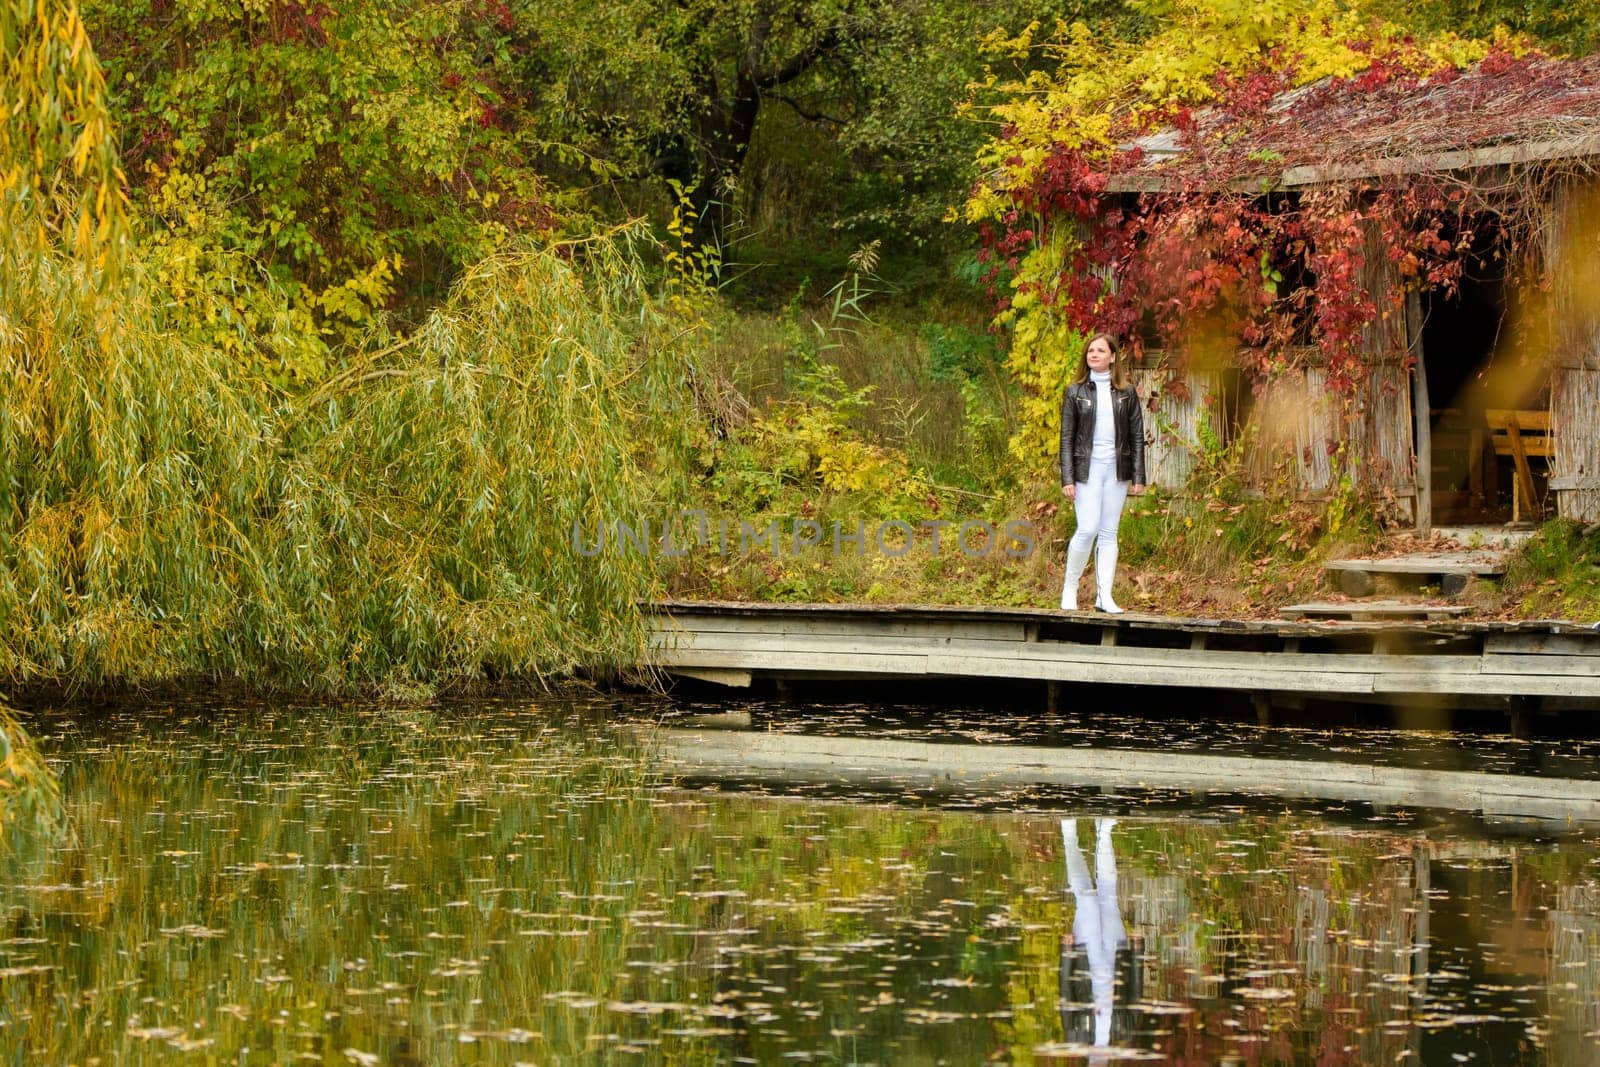 A young beautiful girl walks by the lake in an autumn park by Madhourse